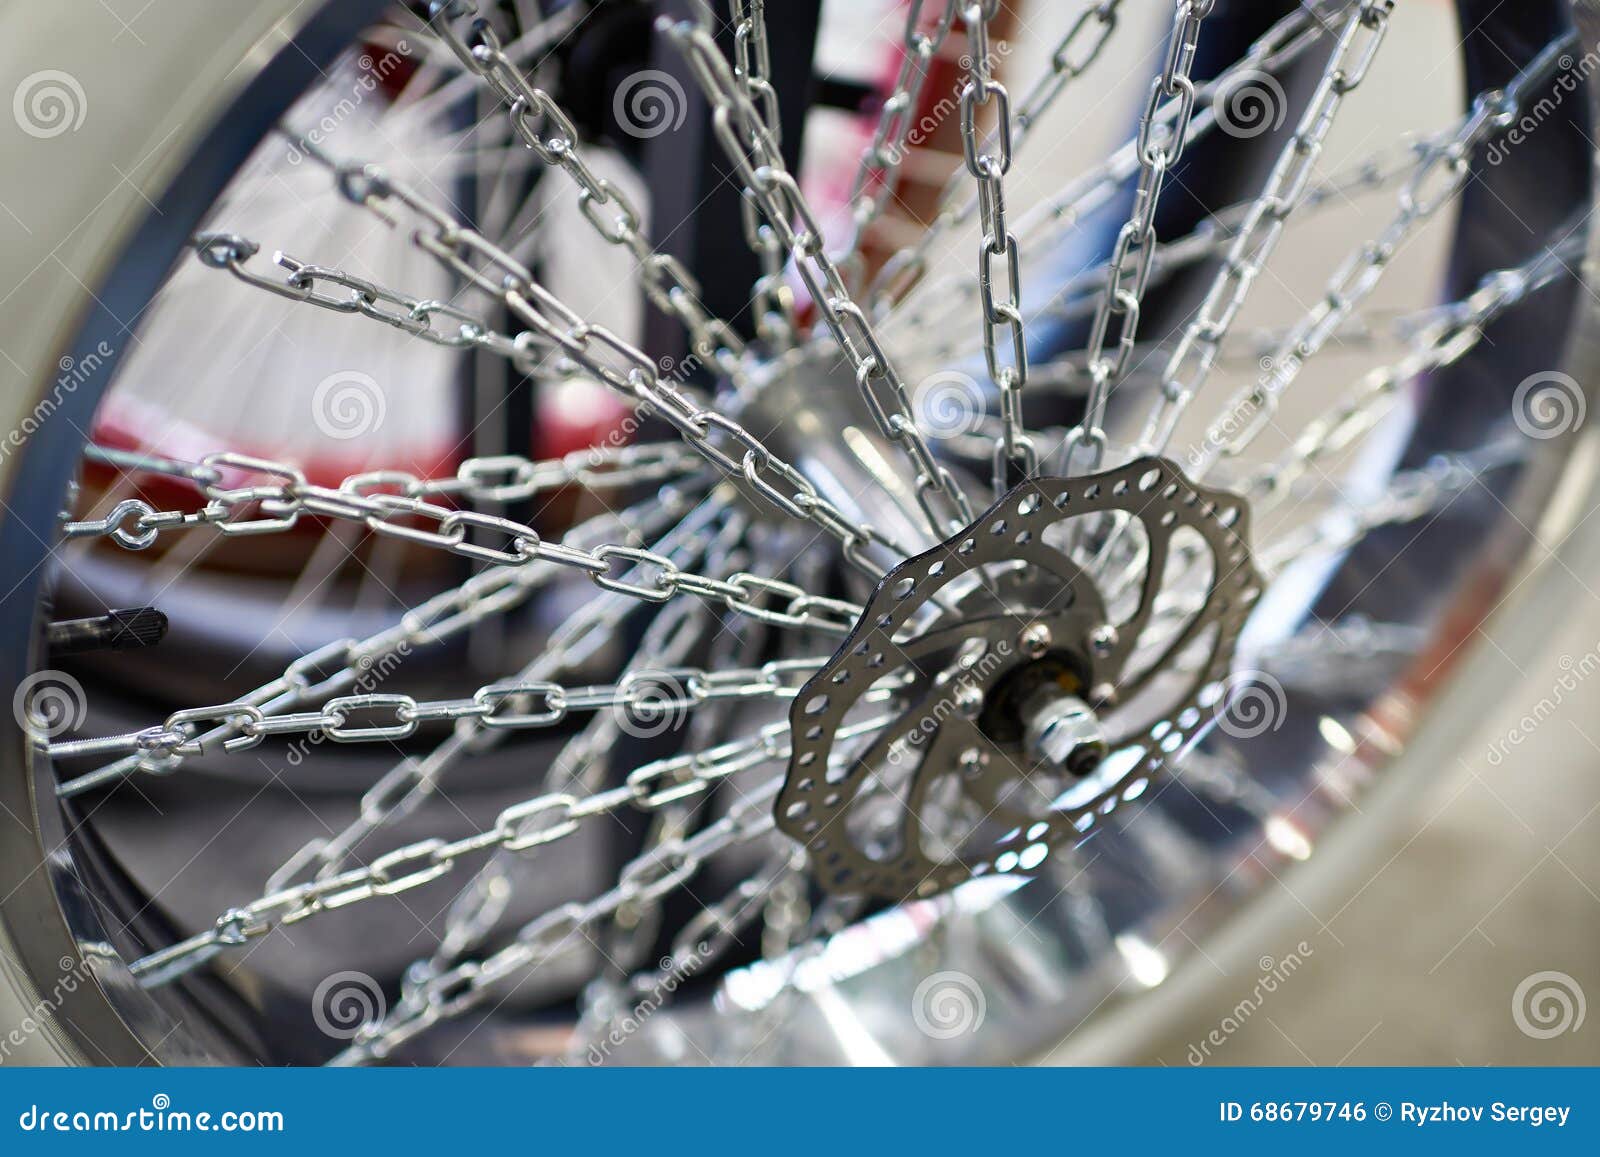 Spokes Chains For Bicycle Stock Photo 